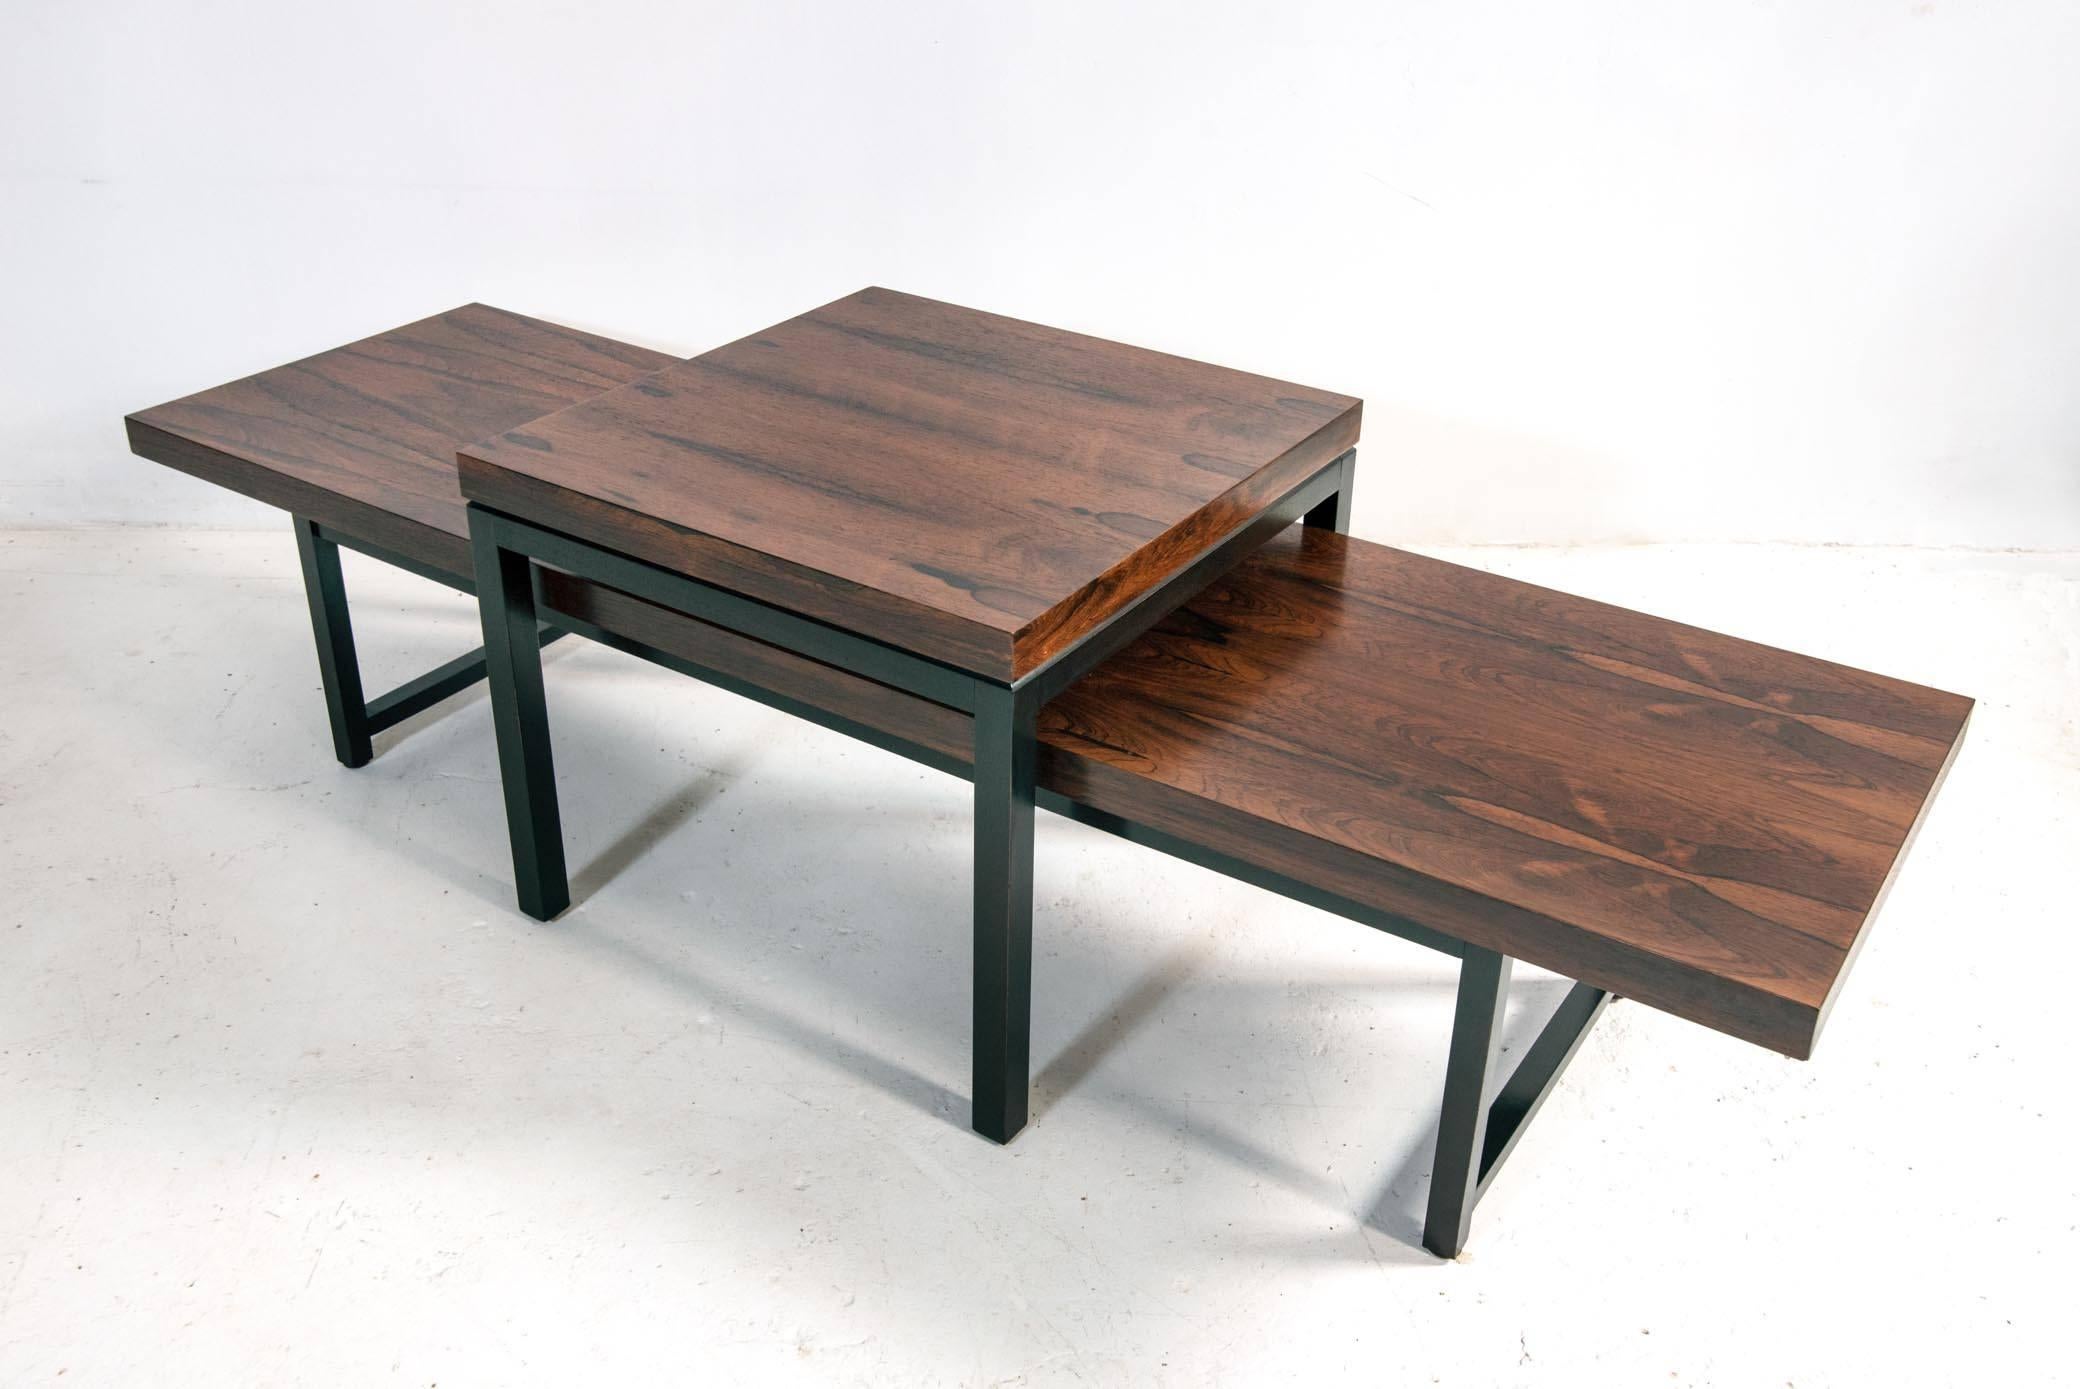 An elegant coffee or cocktail table designed by Milo Baughman for Thayer Coggin, circa 1960. Featuring a beautifully grained rosewood top supported by an architectural base in black lacquer. Recently refinished and in excellent vintage